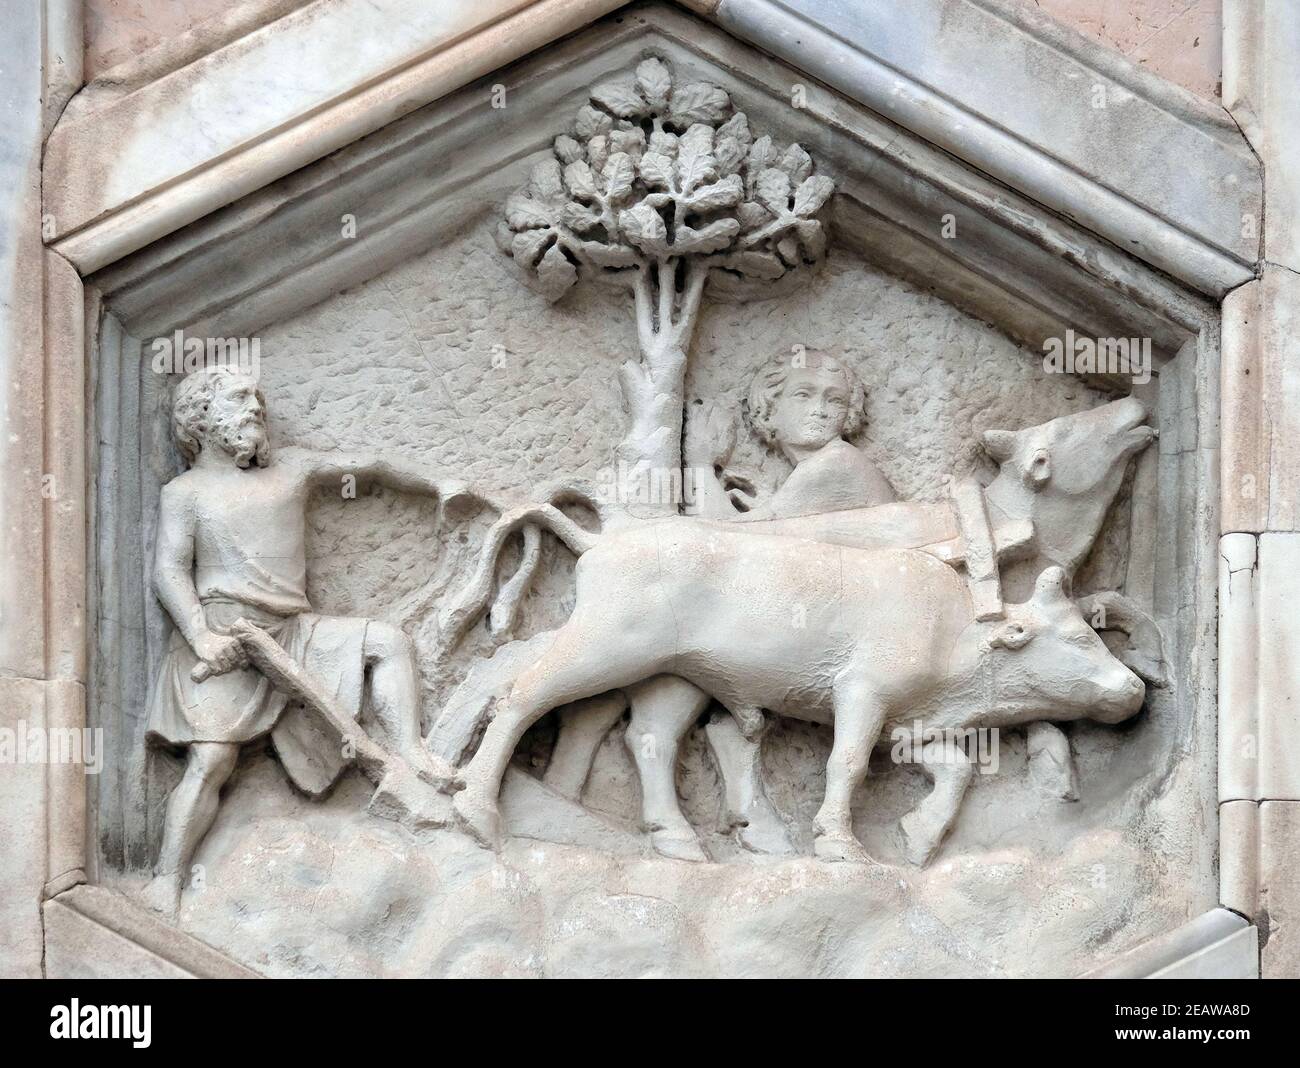 Agriculture from the workshop of Andrea Pisano, Relief on Giotto Campanile of Cattedrale di Santa Maria del Fiore (Cathedral of Saint Mary of the Flower), Florence, Italy Stock Photo